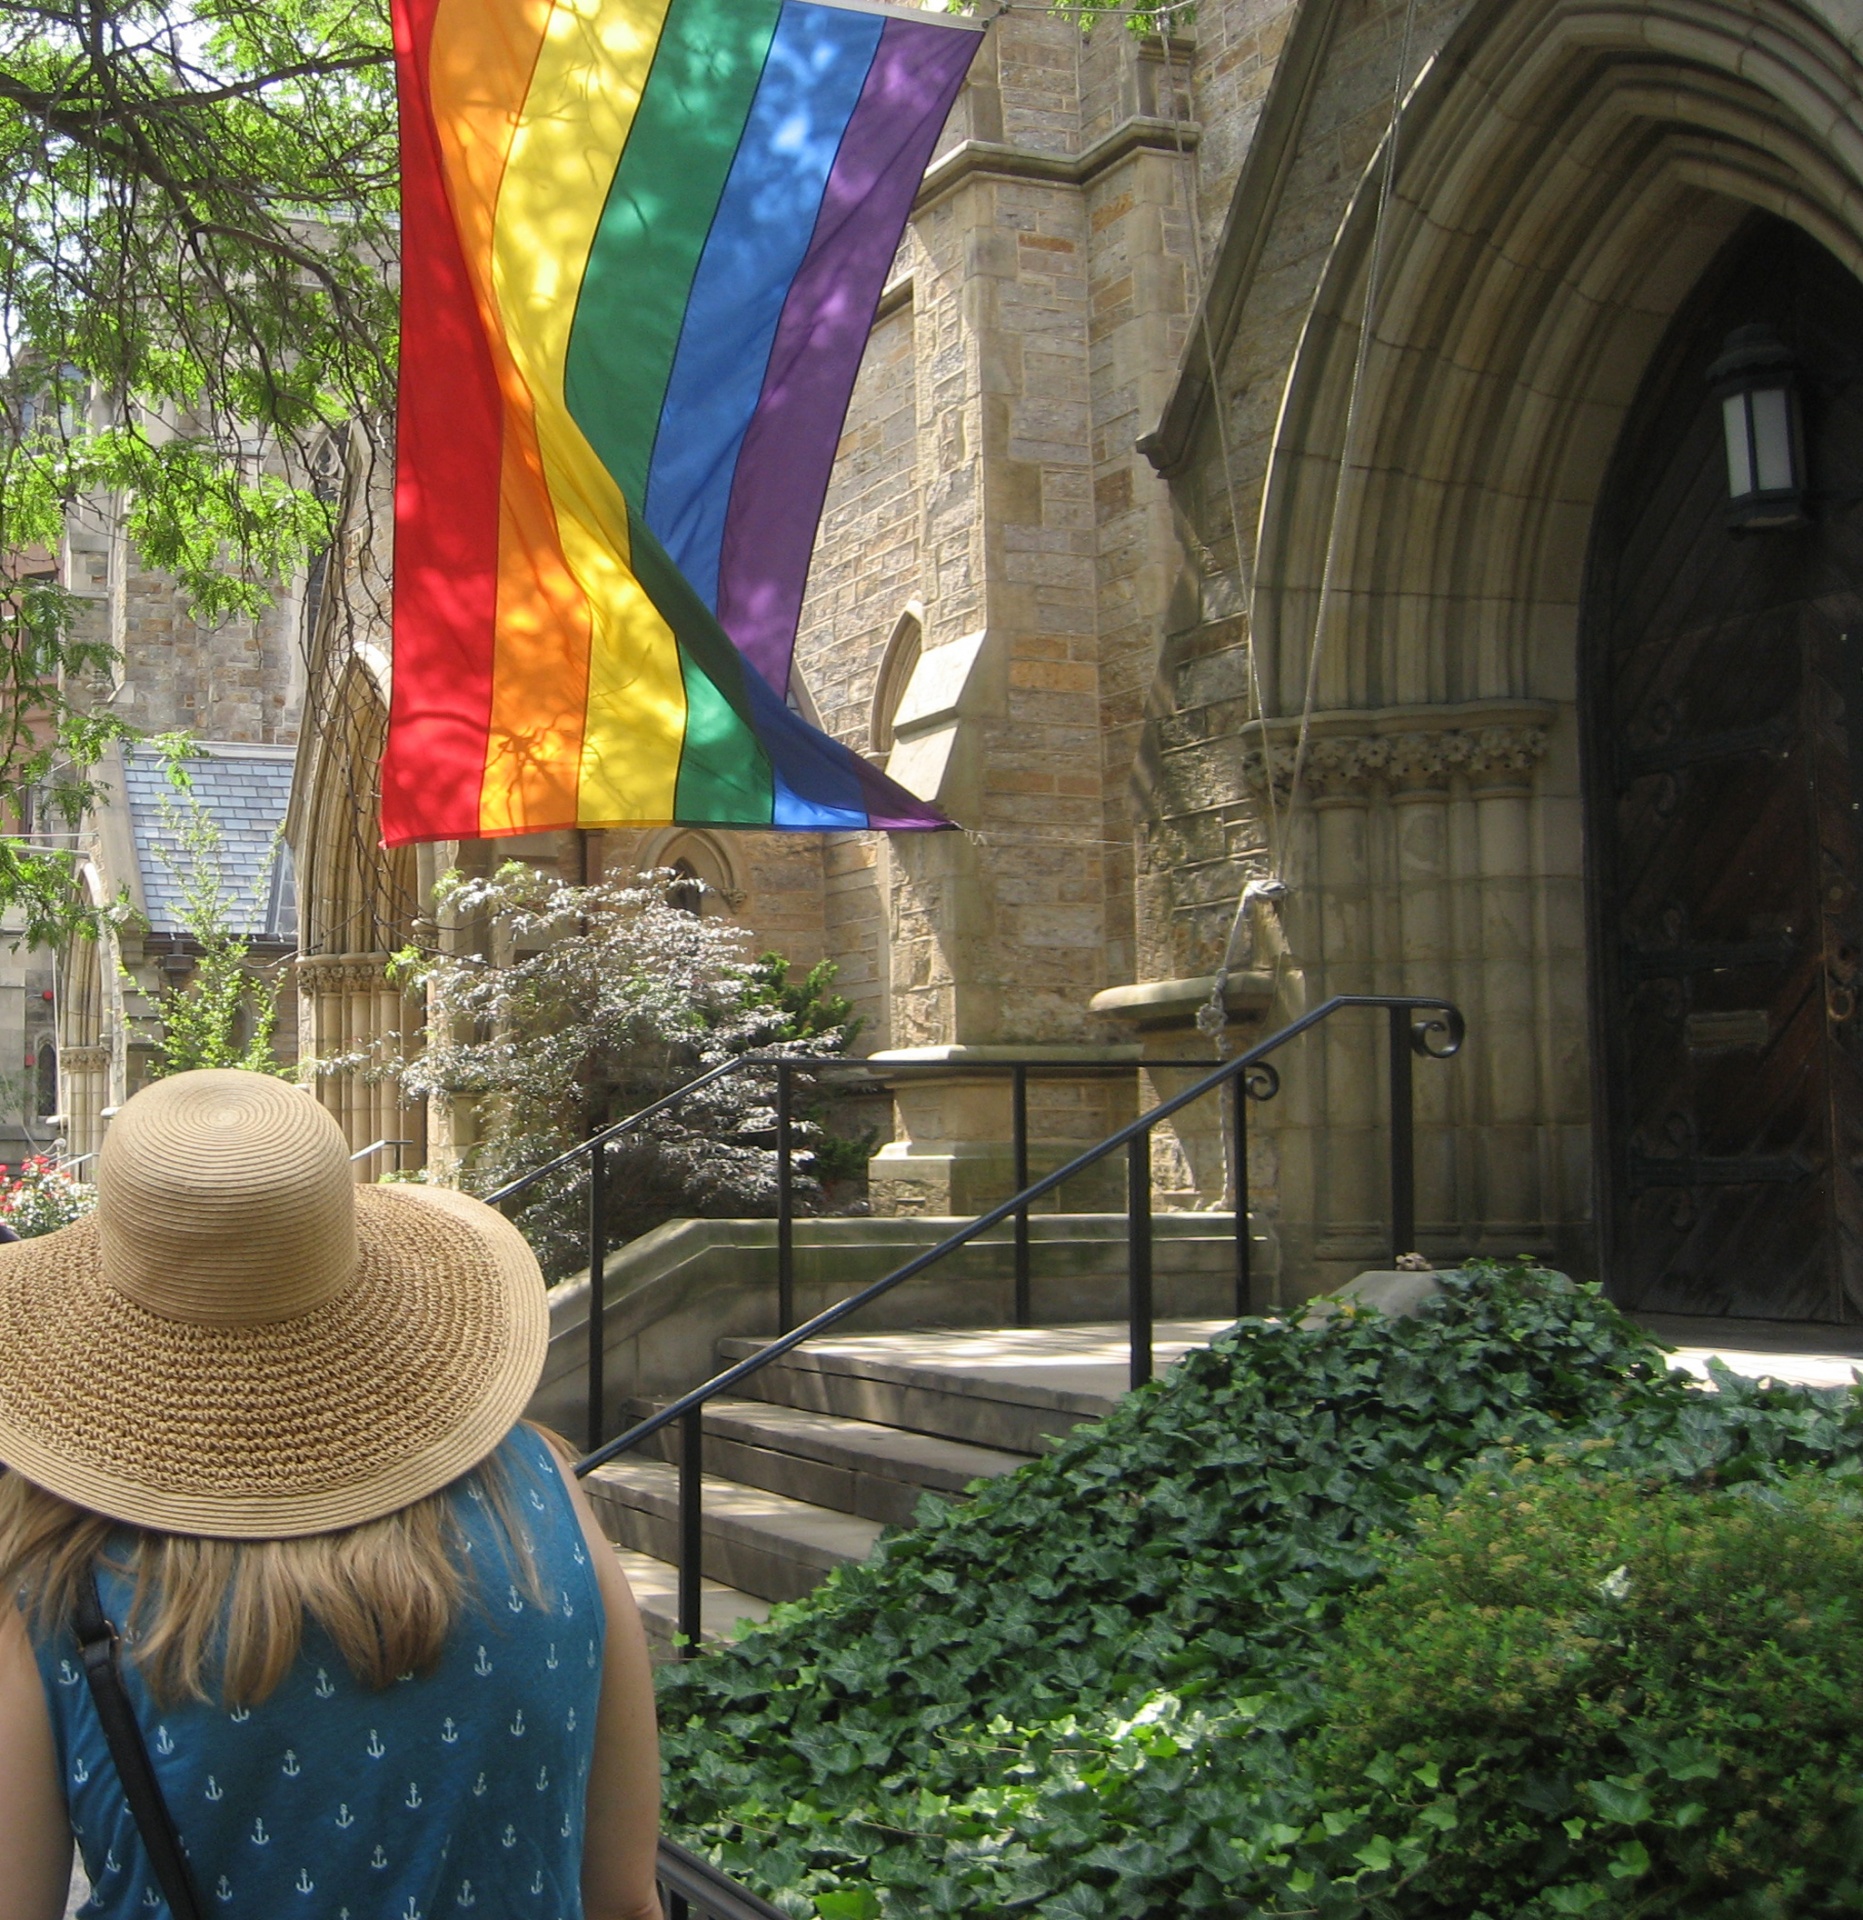 Woman in hat walking up to church doors with rainbow flag